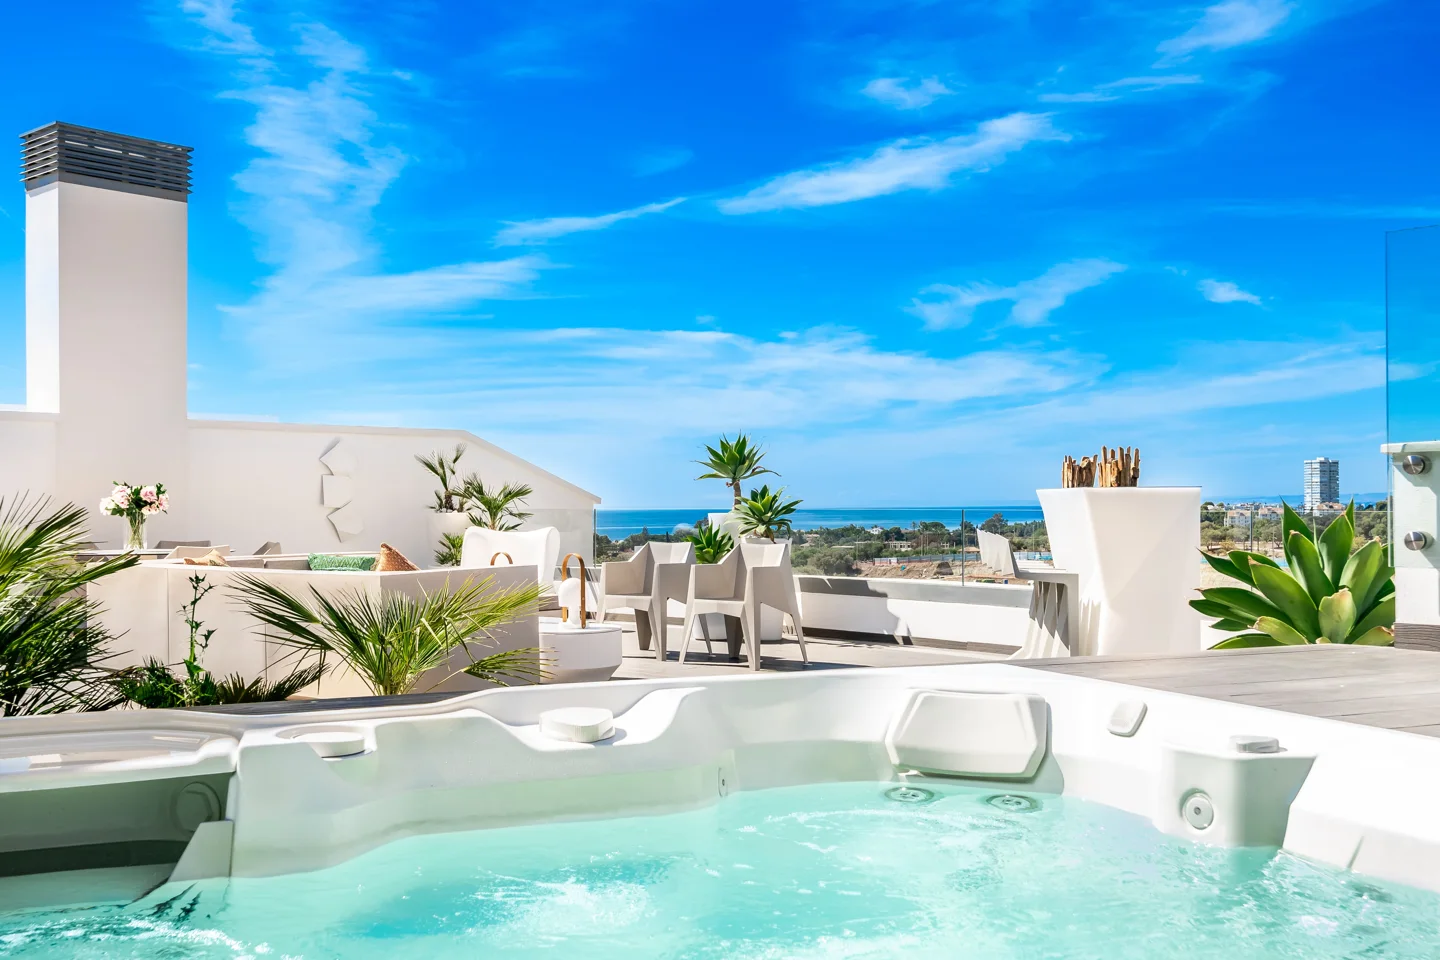 Luxury Villa with private pool, rooftop Jacuzzi, and spectacular views. Price from €5,250 per week